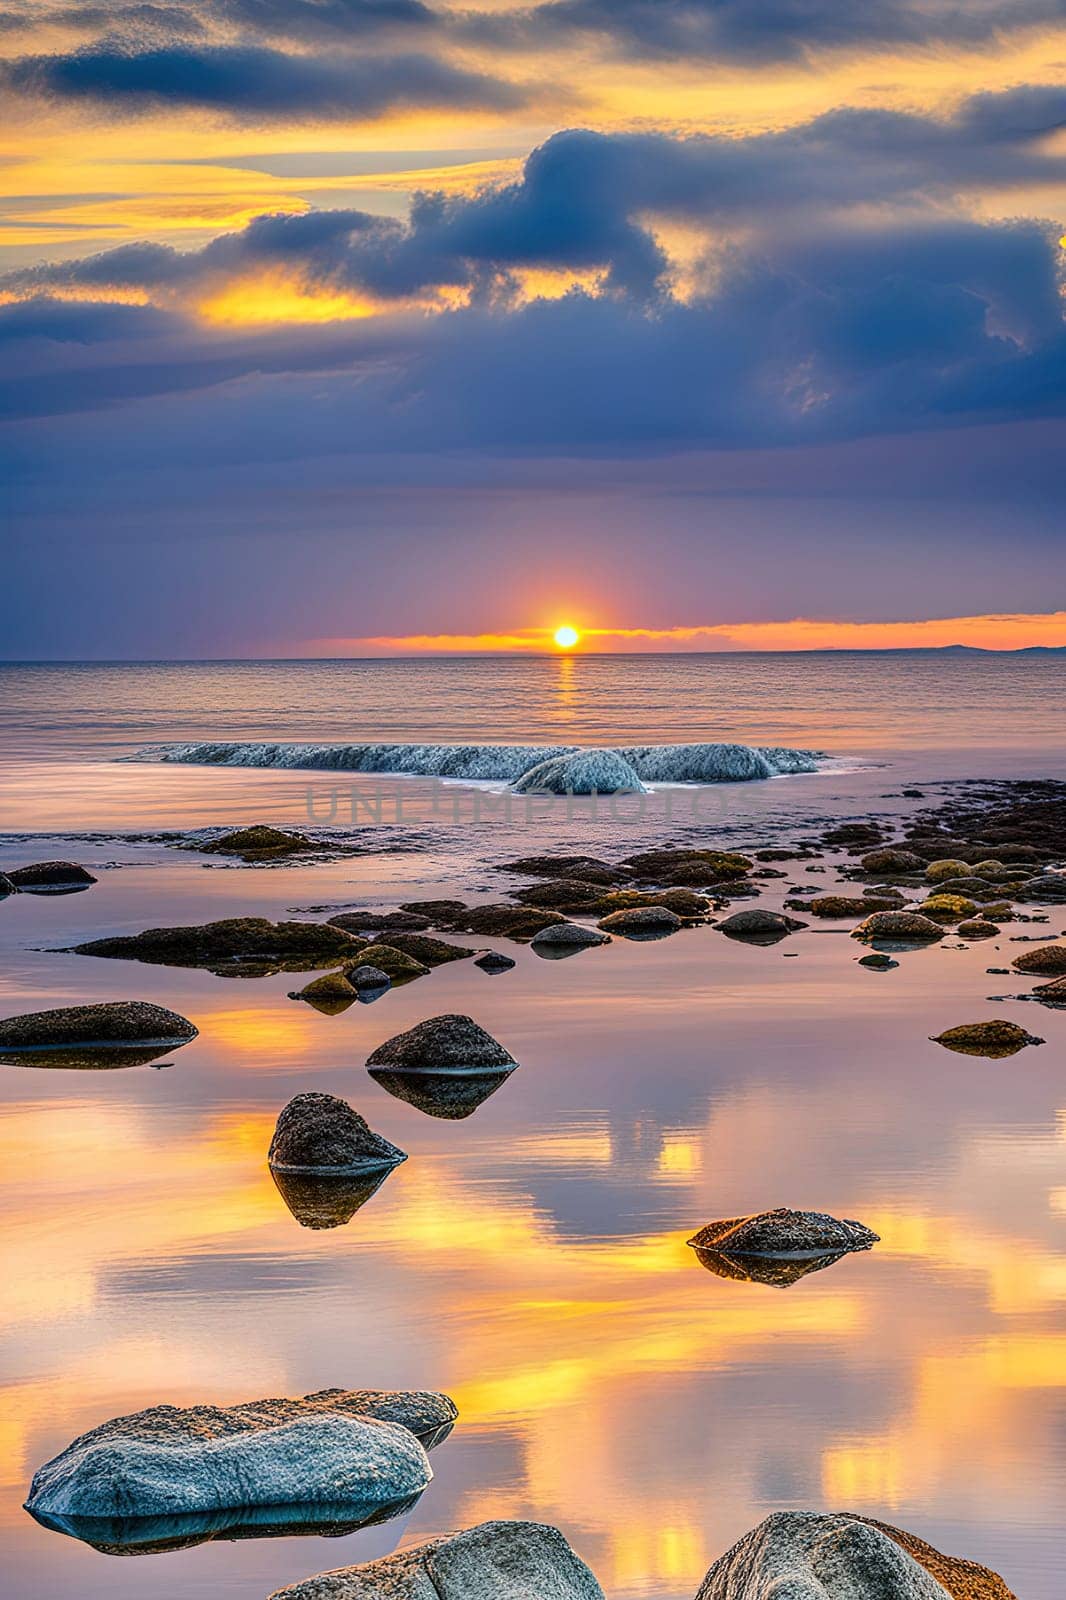 Sunset over the sea with stones on the foreground. by yilmazsavaskandag